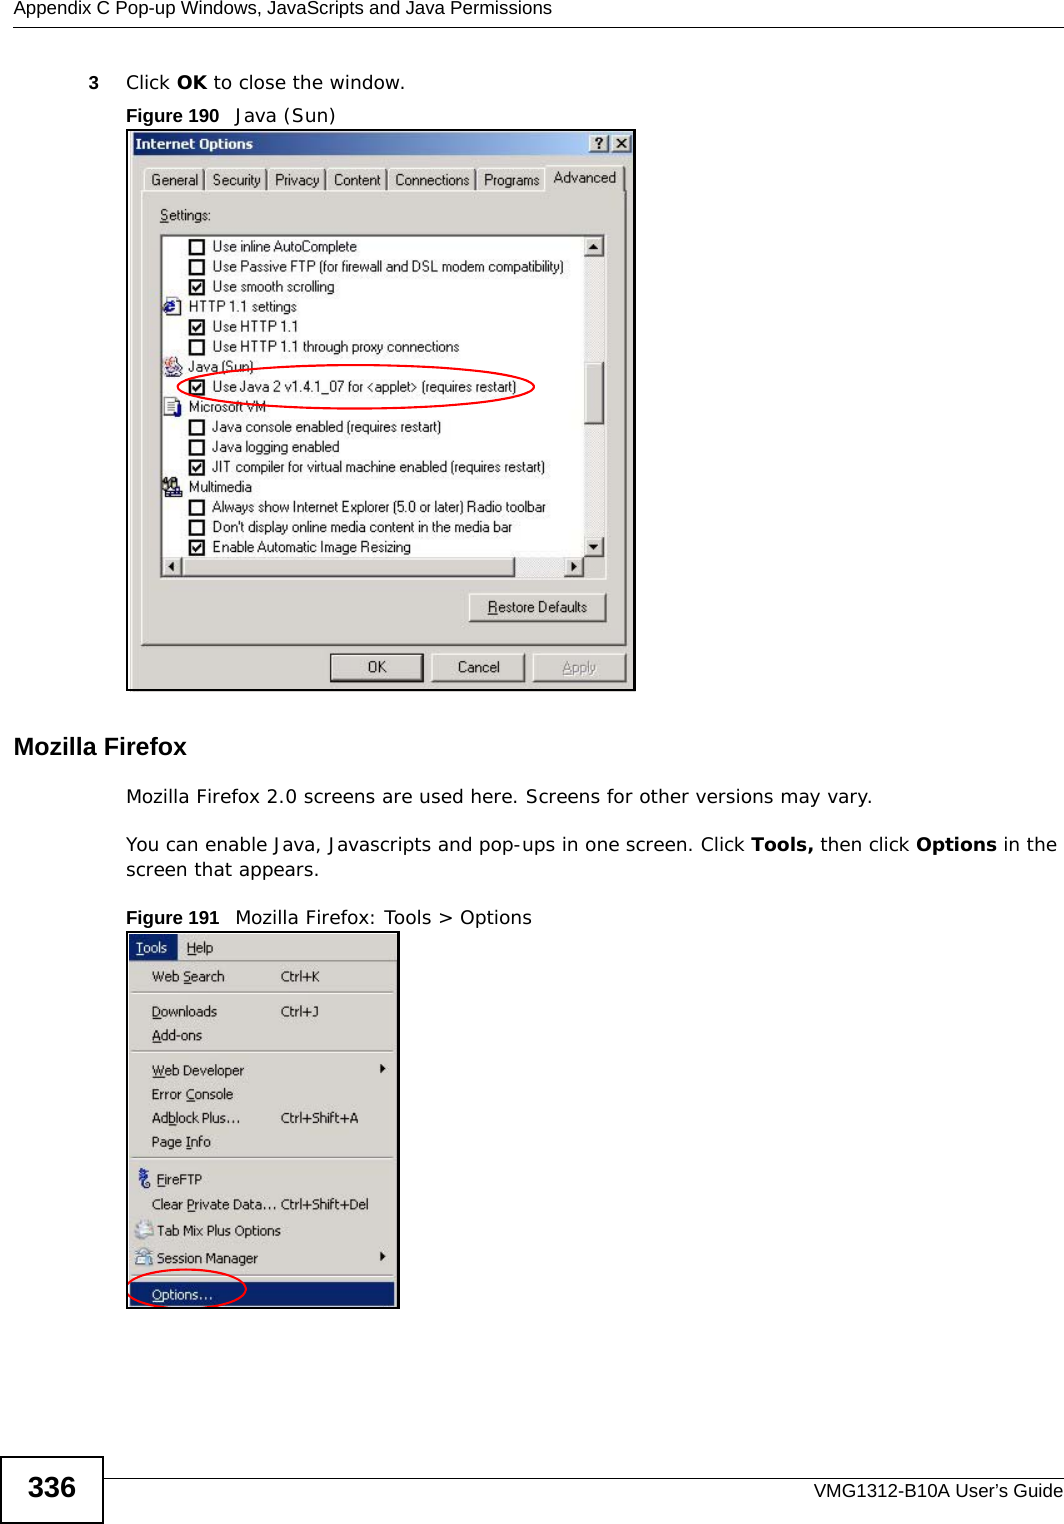 Appendix C Pop-up Windows, JavaScripts and Java PermissionsVMG1312-B10A User’s Guide3363Click OK to close the window.Figure 190   Java (Sun)Mozilla FirefoxMozilla Firefox 2.0 screens are used here. Screens for other versions may vary. You can enable Java, Javascripts and pop-ups in one screen. Click Tools, then click Options in the screen that appears.Figure 191   Mozilla Firefox: Tools &gt; Options